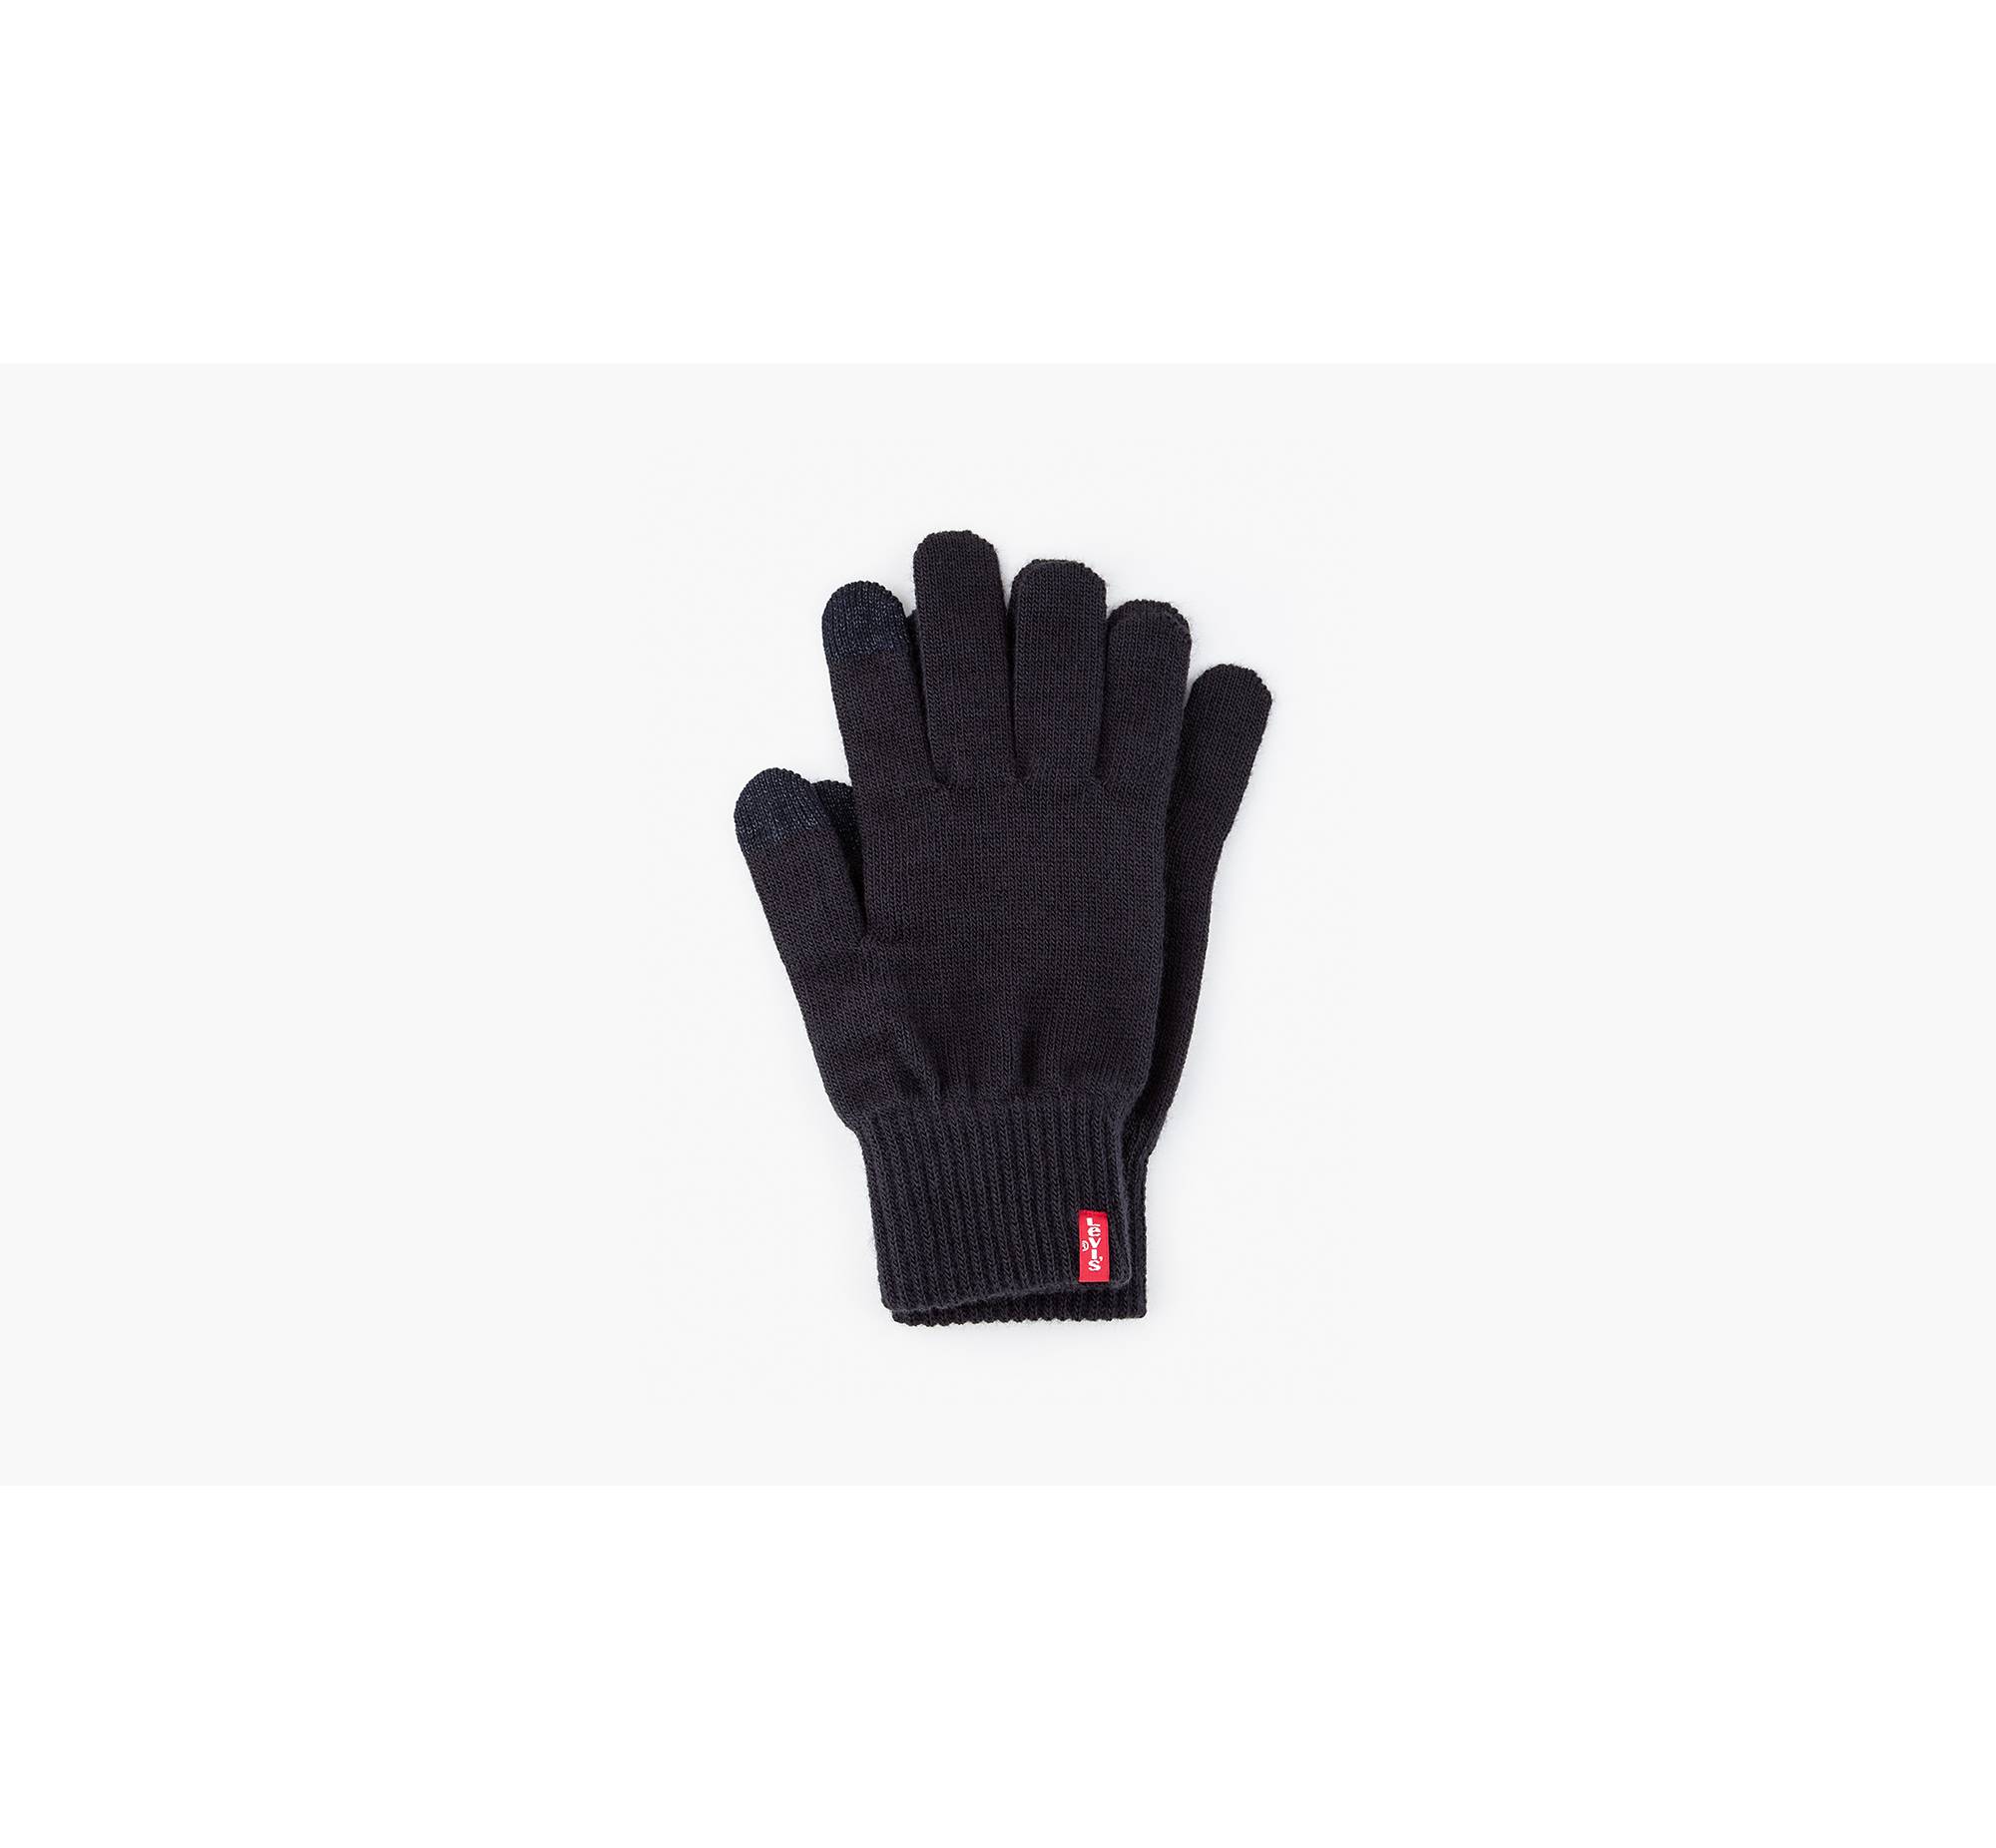 Touch Screen Gloves - Blue